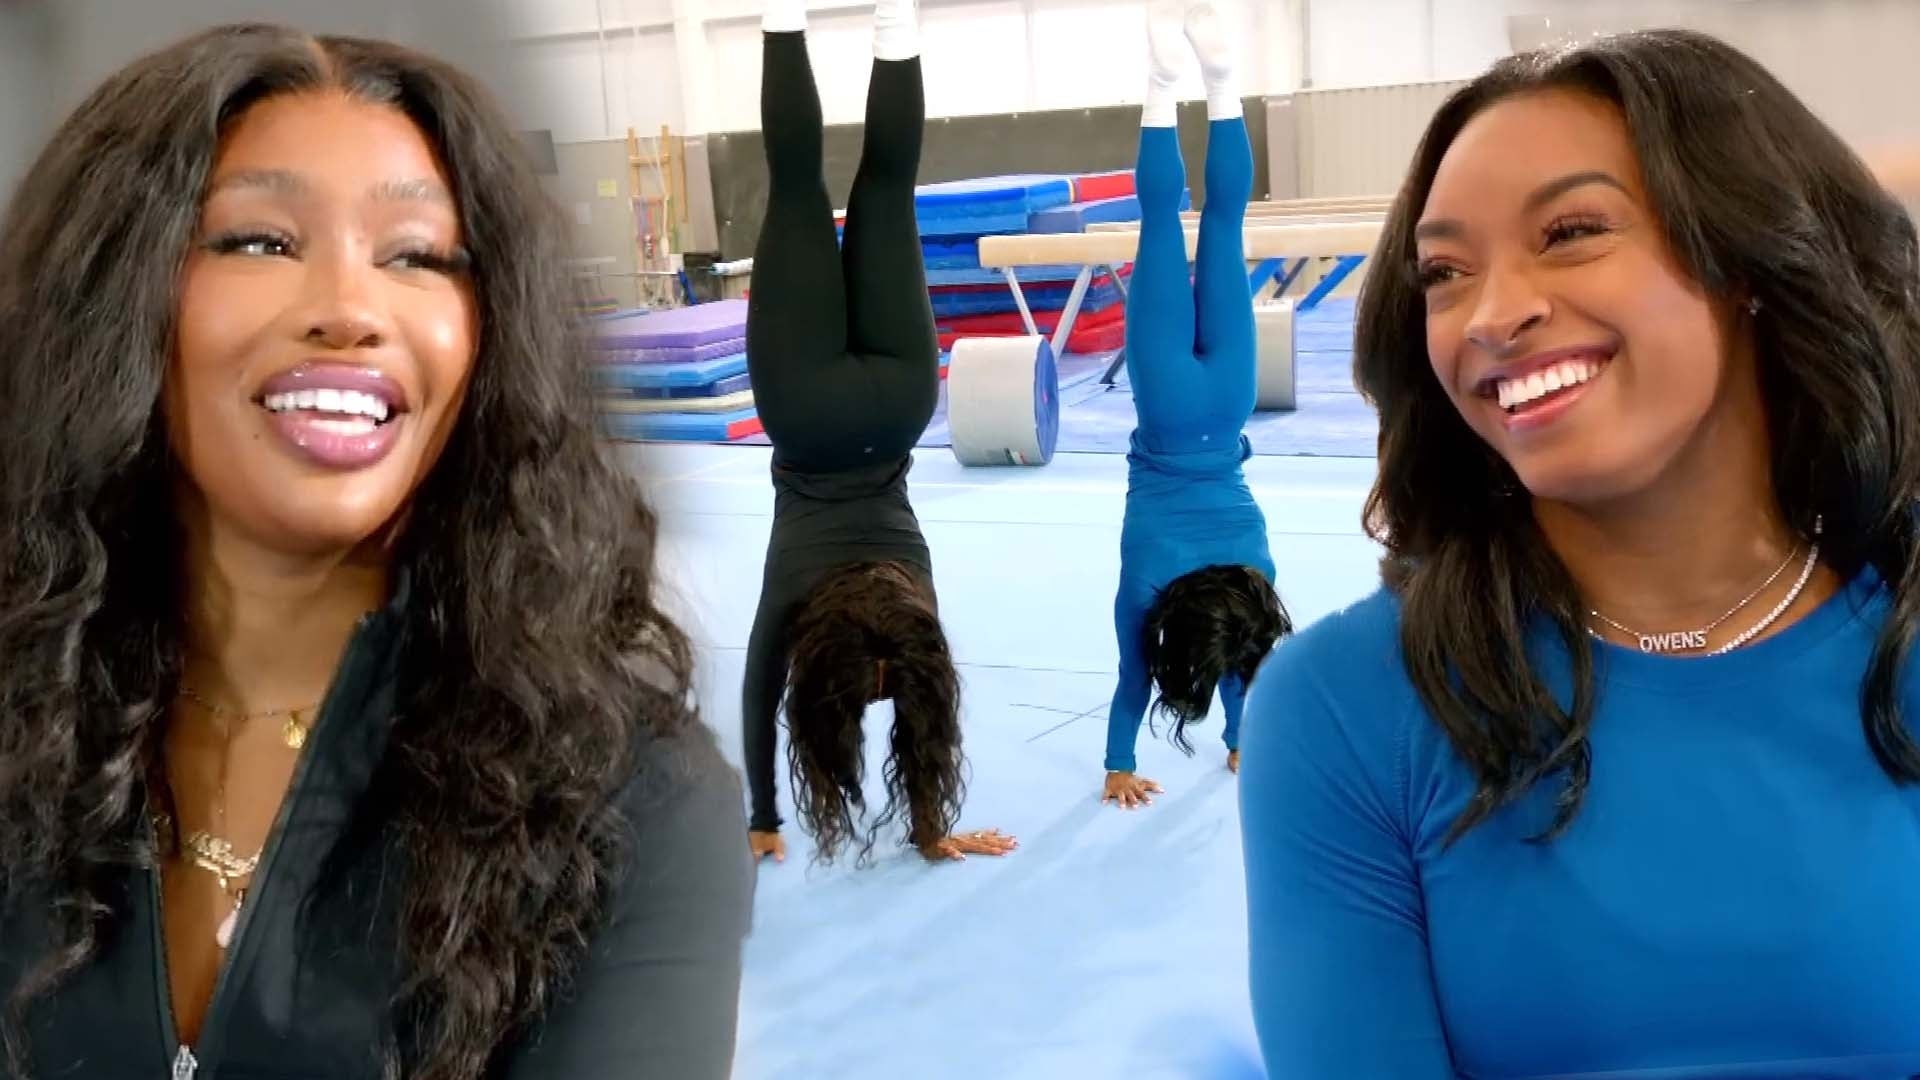 SZA Competes With Simone Biles in a Handstand Competition!